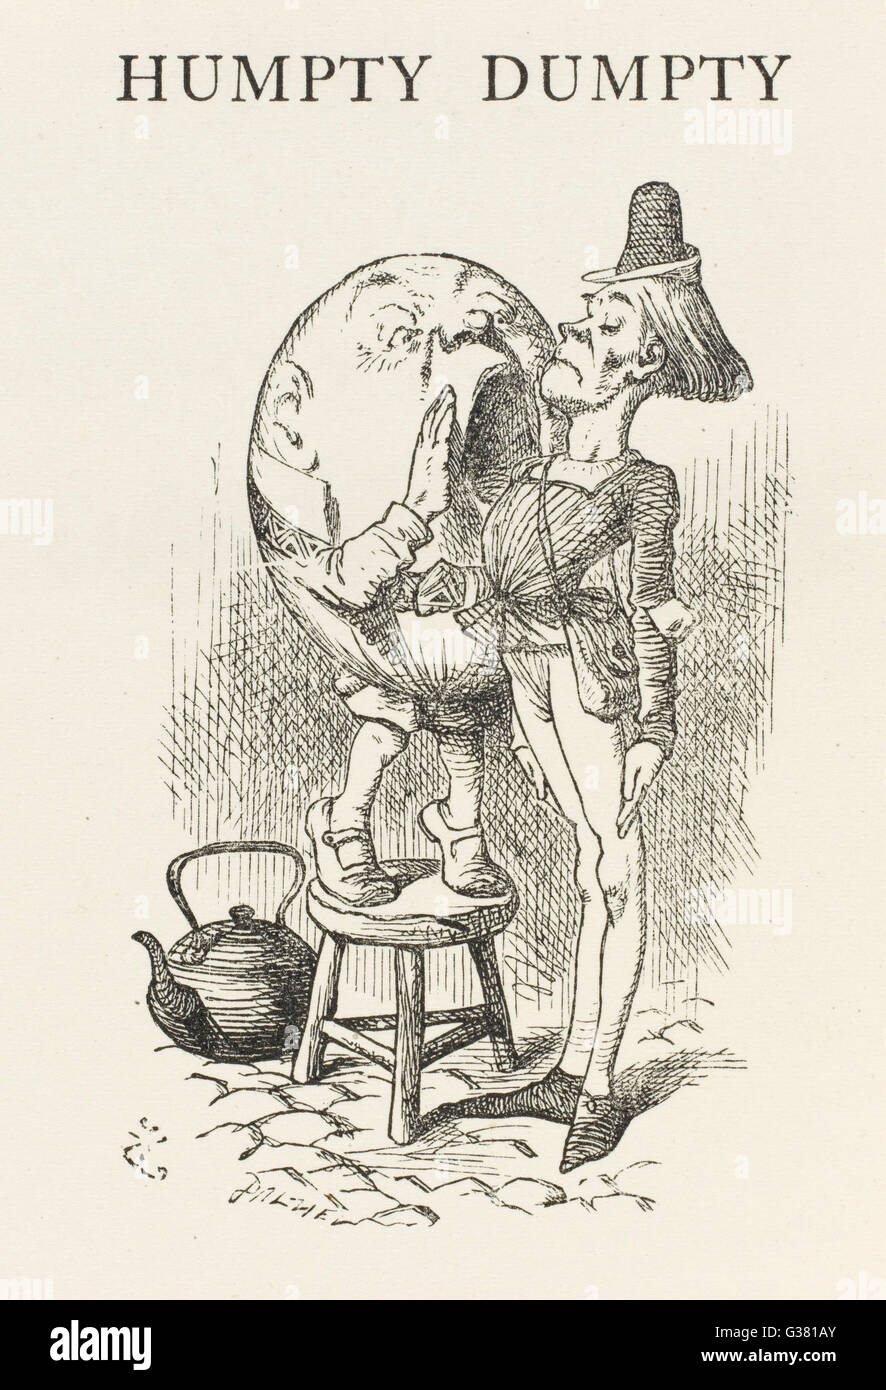 Humpty-Dumpty screams into the ear of the messenger        Date: First published: 1872 Stock Photo